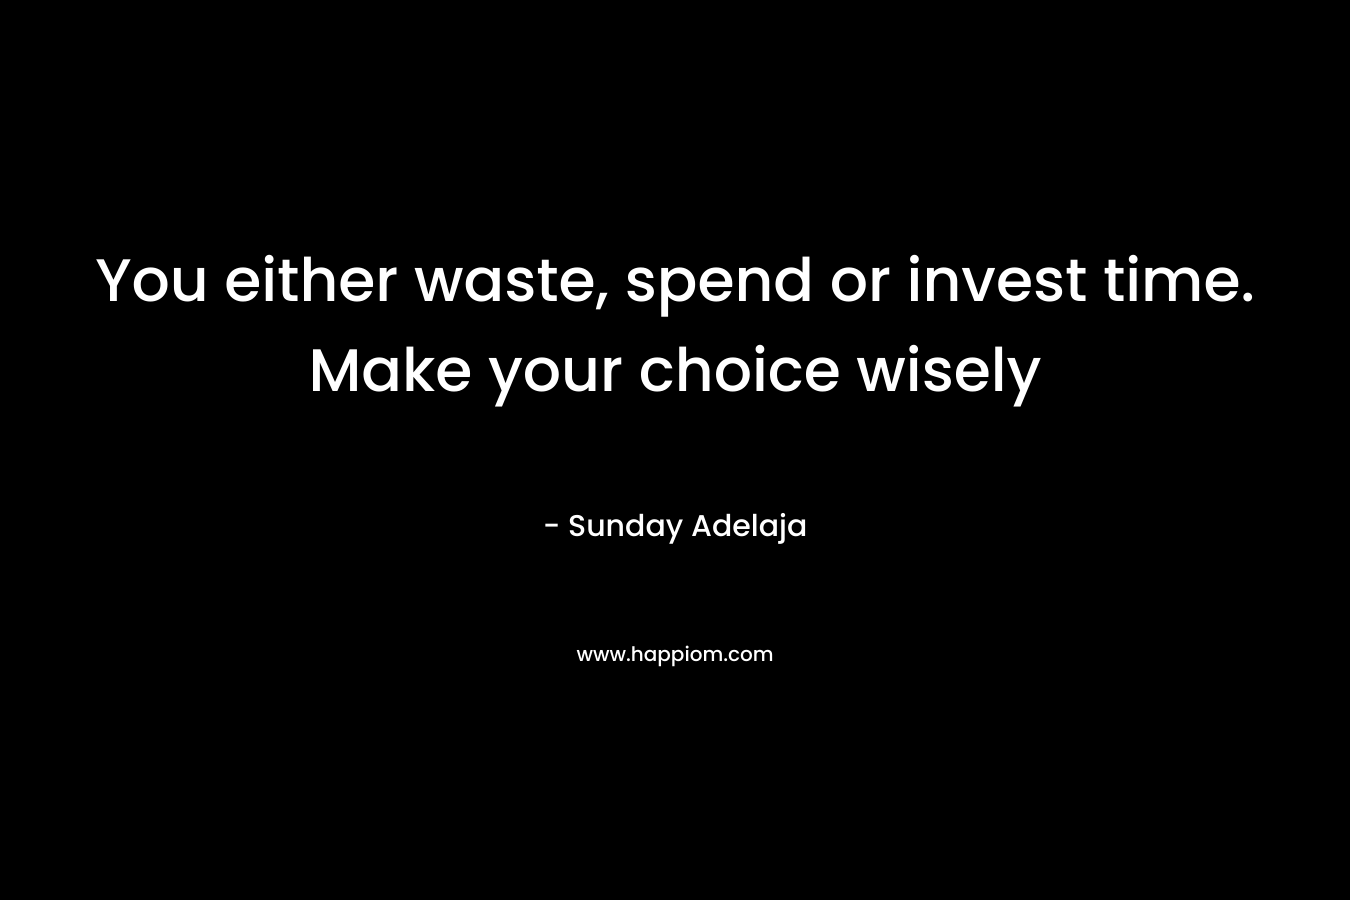 You either waste, spend or invest time. Make your choice wisely